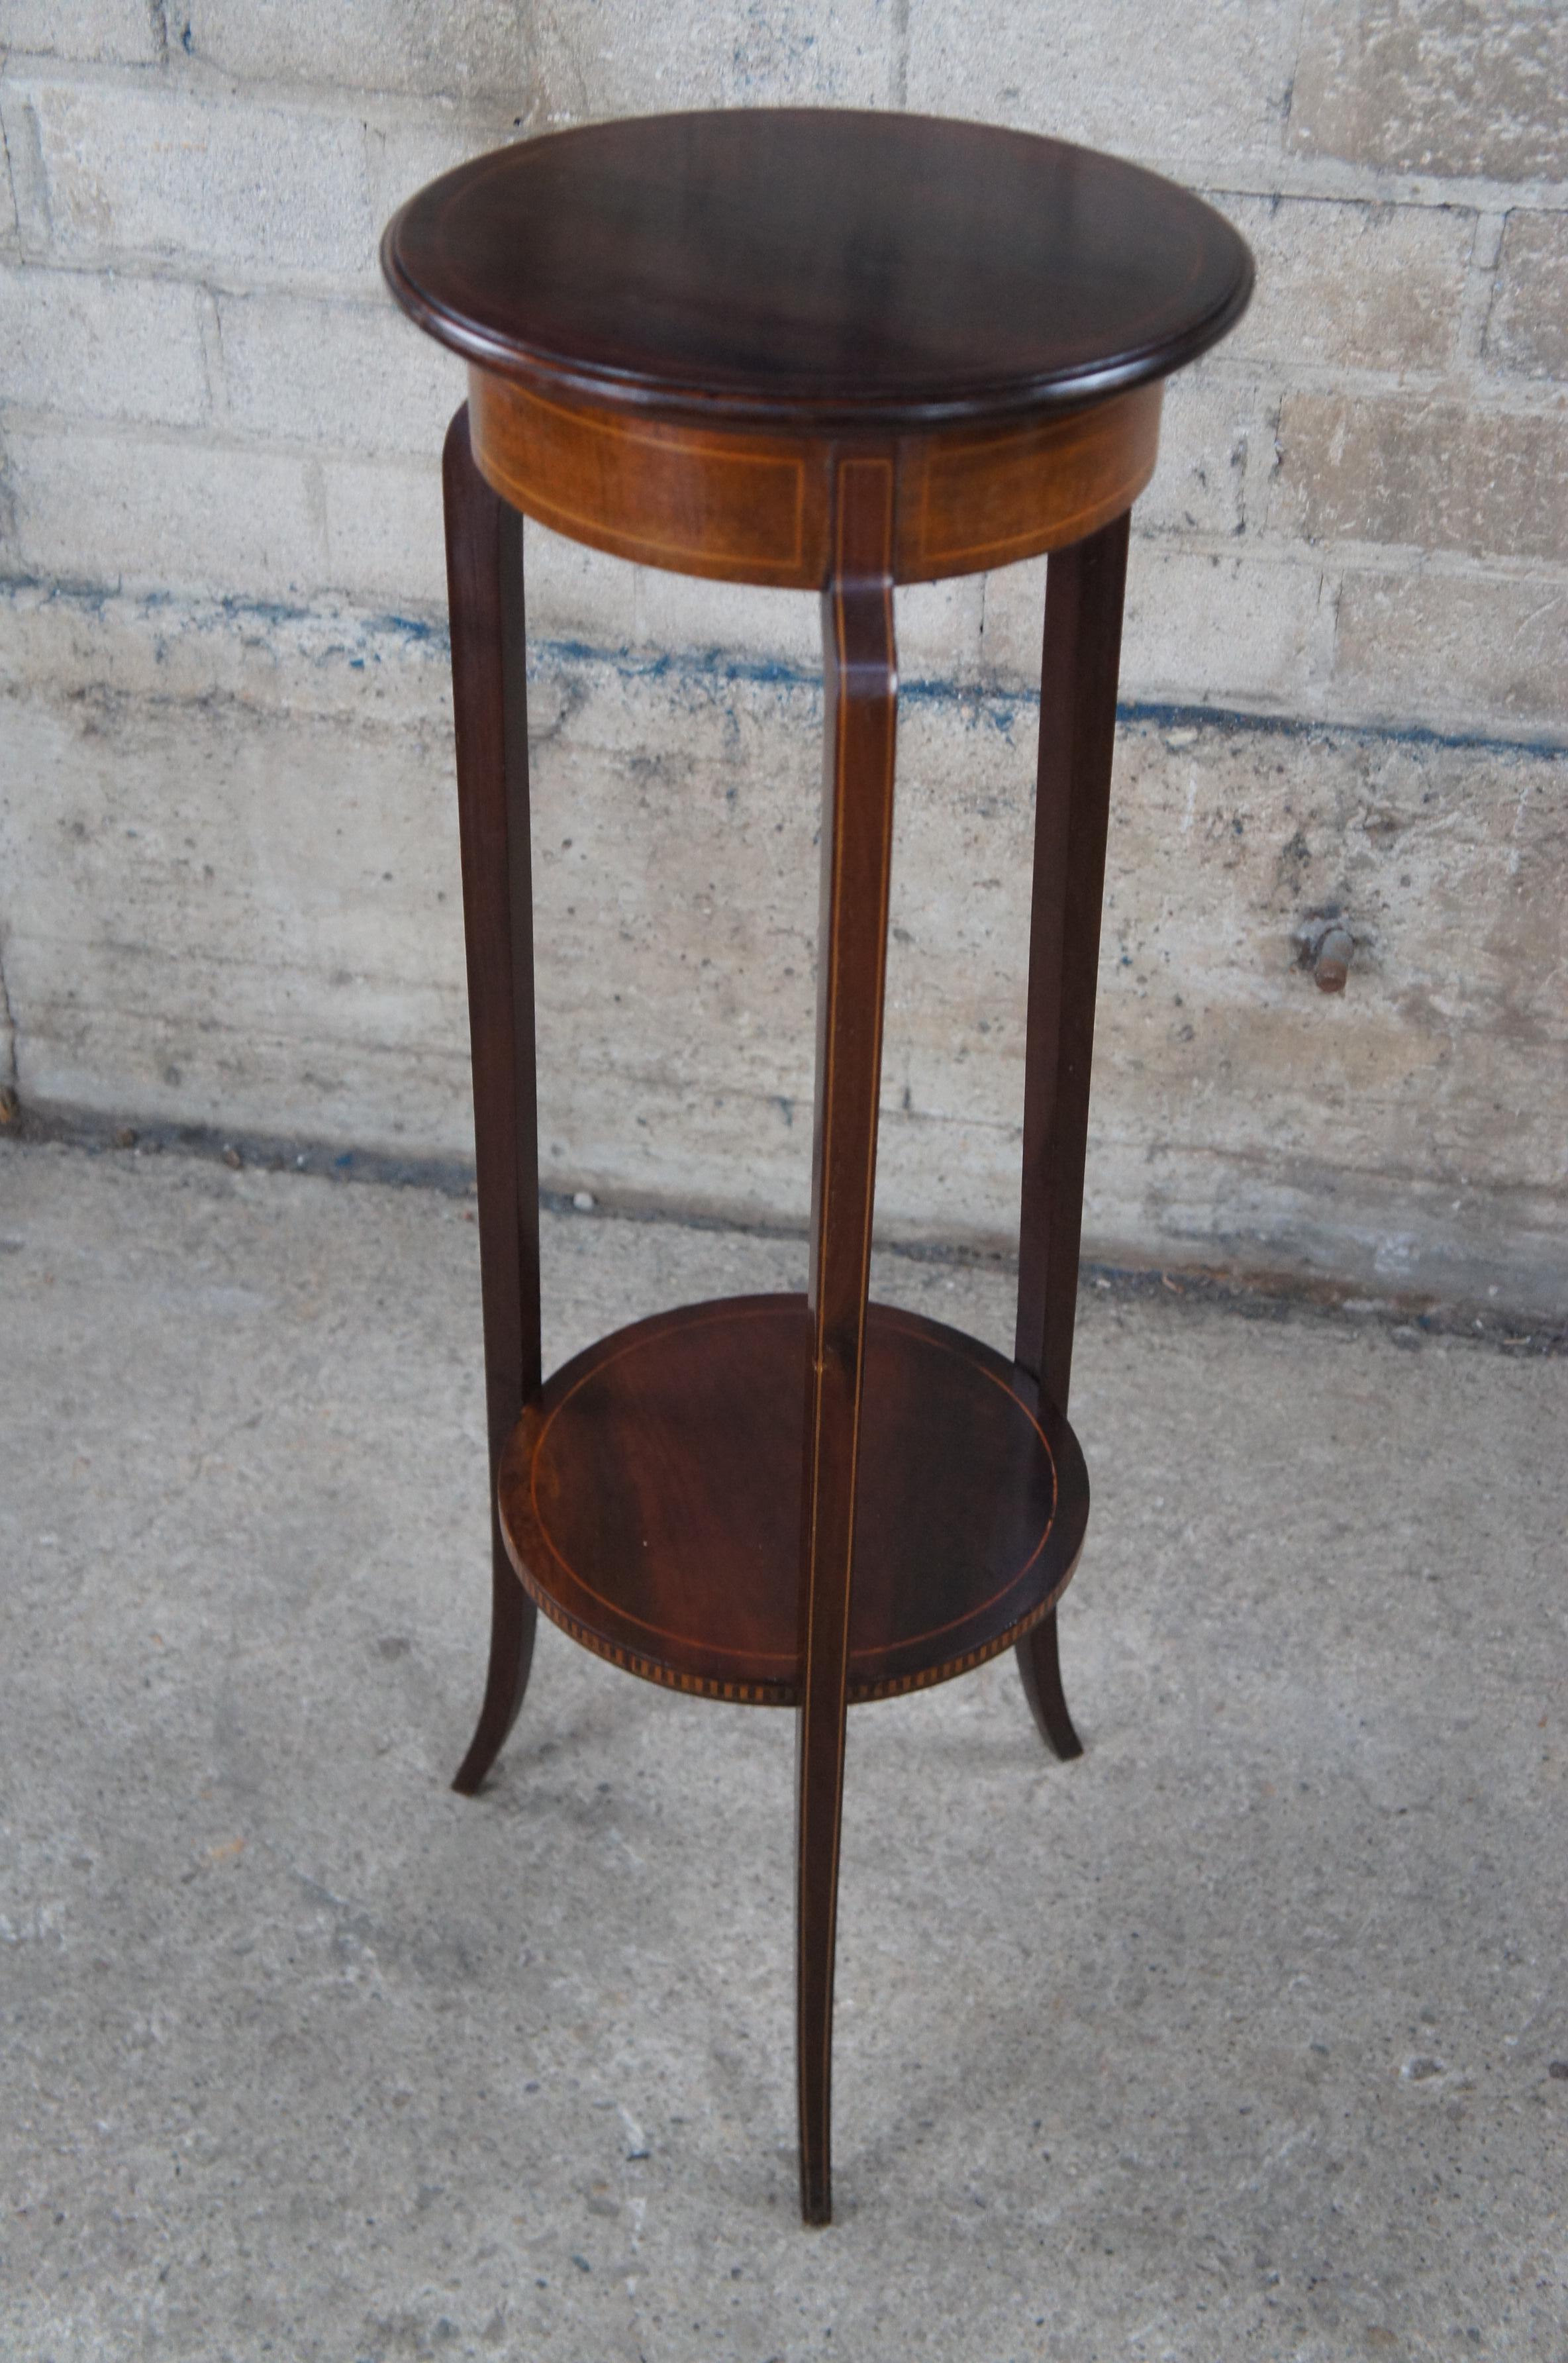 Antique Edwardian Sheraton Mahogany Inlaid Plant Stand Sculpture Pedestal Table For Sale 8